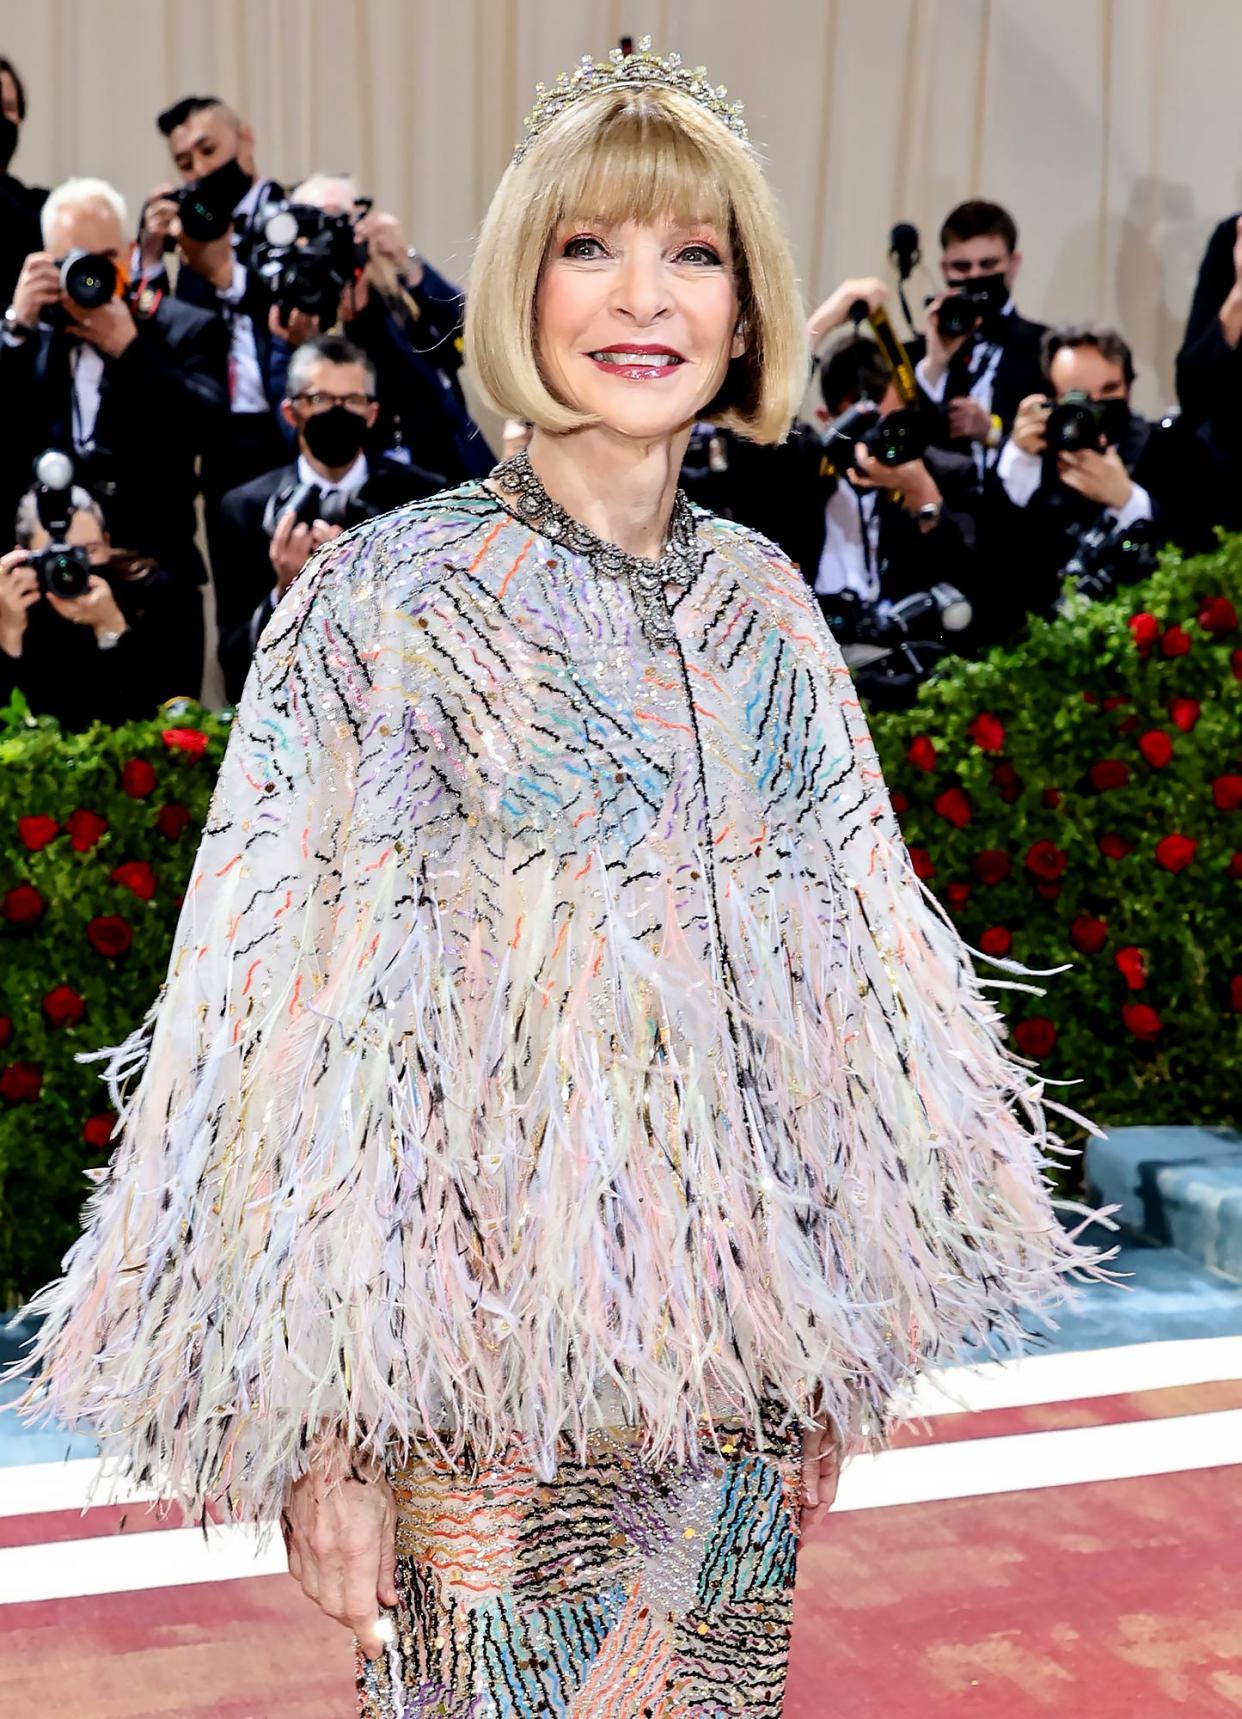 See Which Foods Anna Wintour Banned from the Met Gala